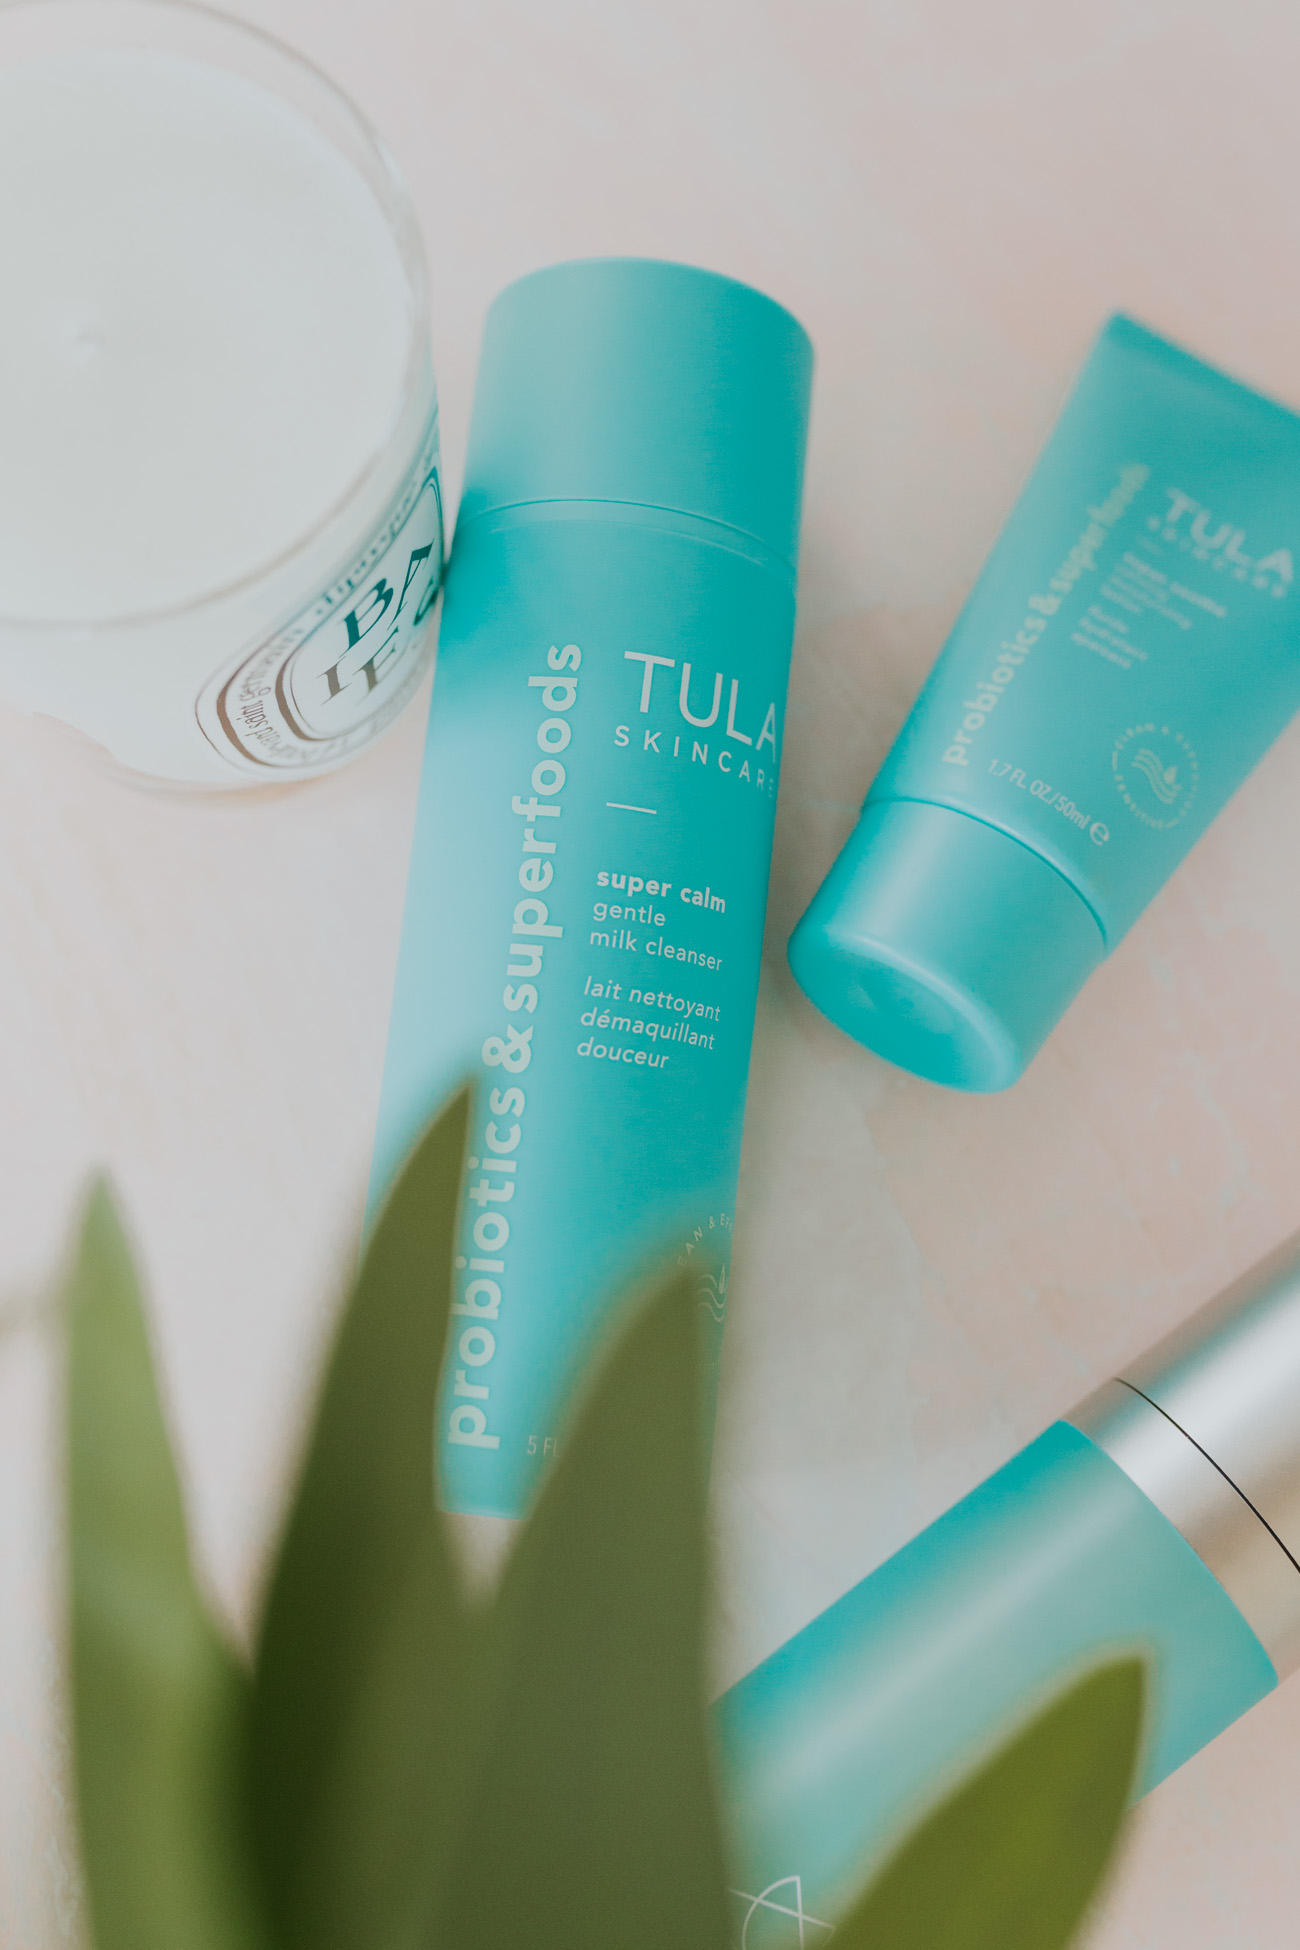 tula probiotic skincare, 6 tips to clear your skin, GRACE white a southern drawl